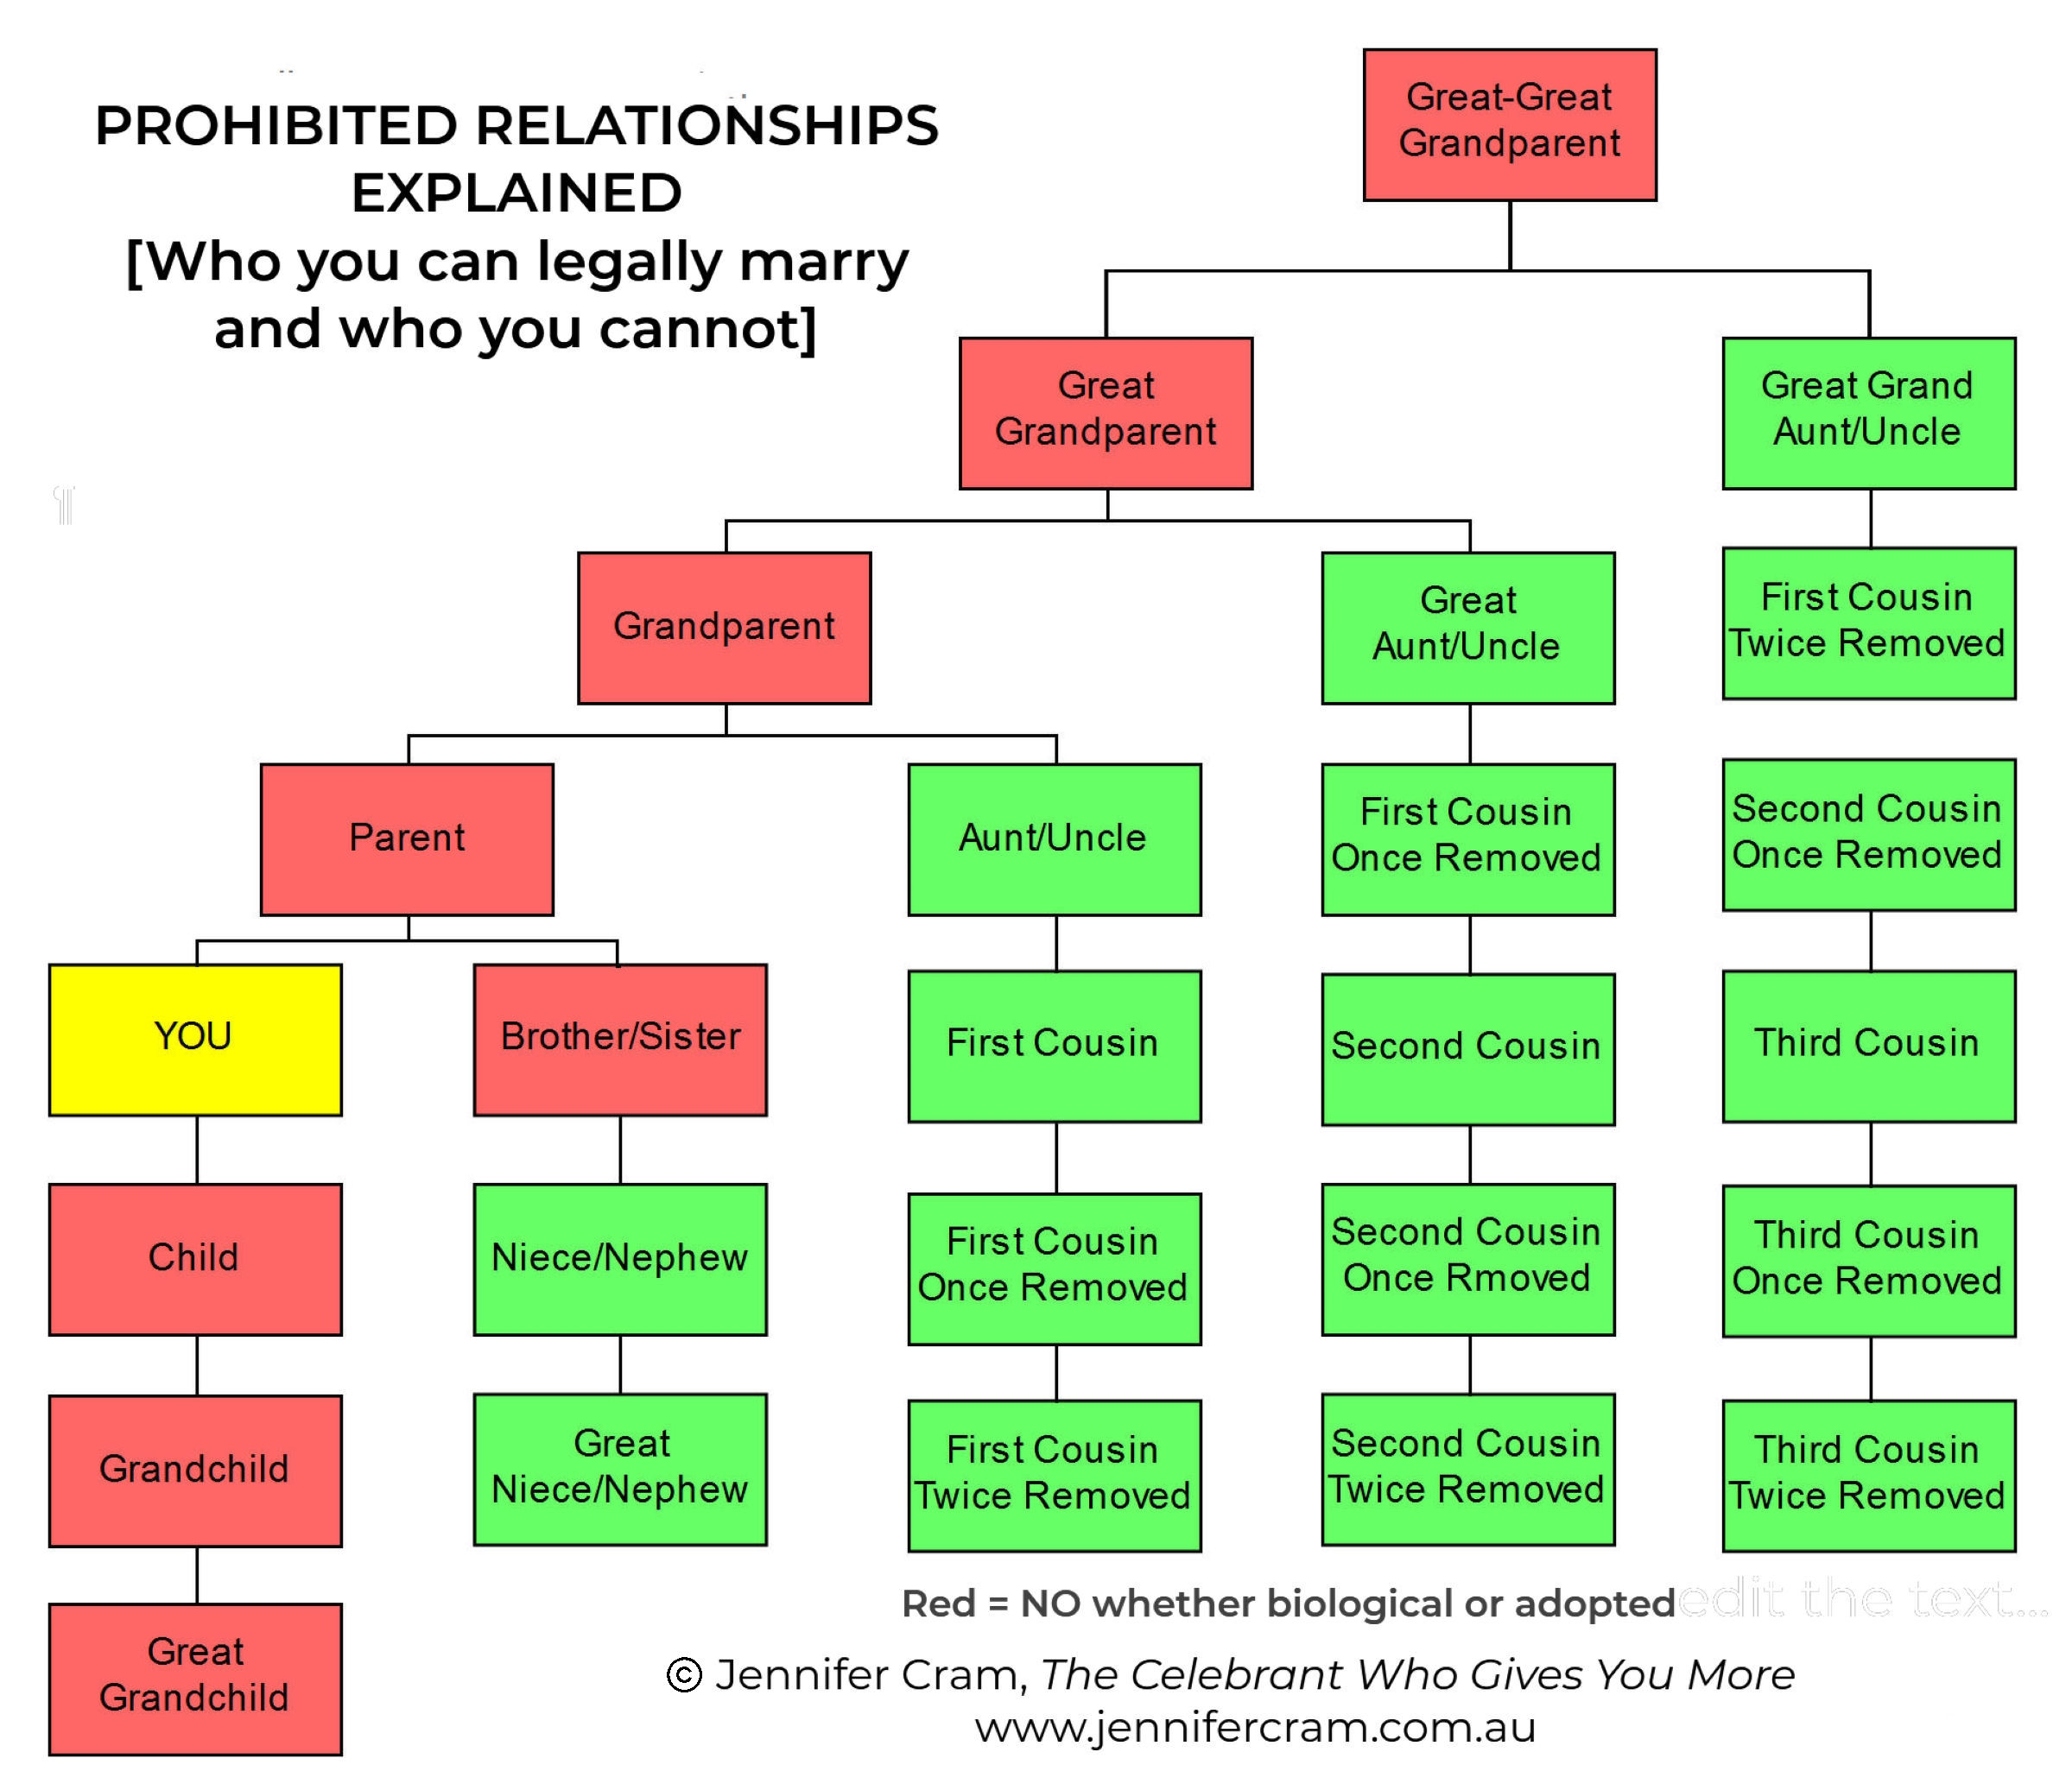 Explaining Prohibited Relationships - a chart
                    showing who you can and cannot marry in Australia